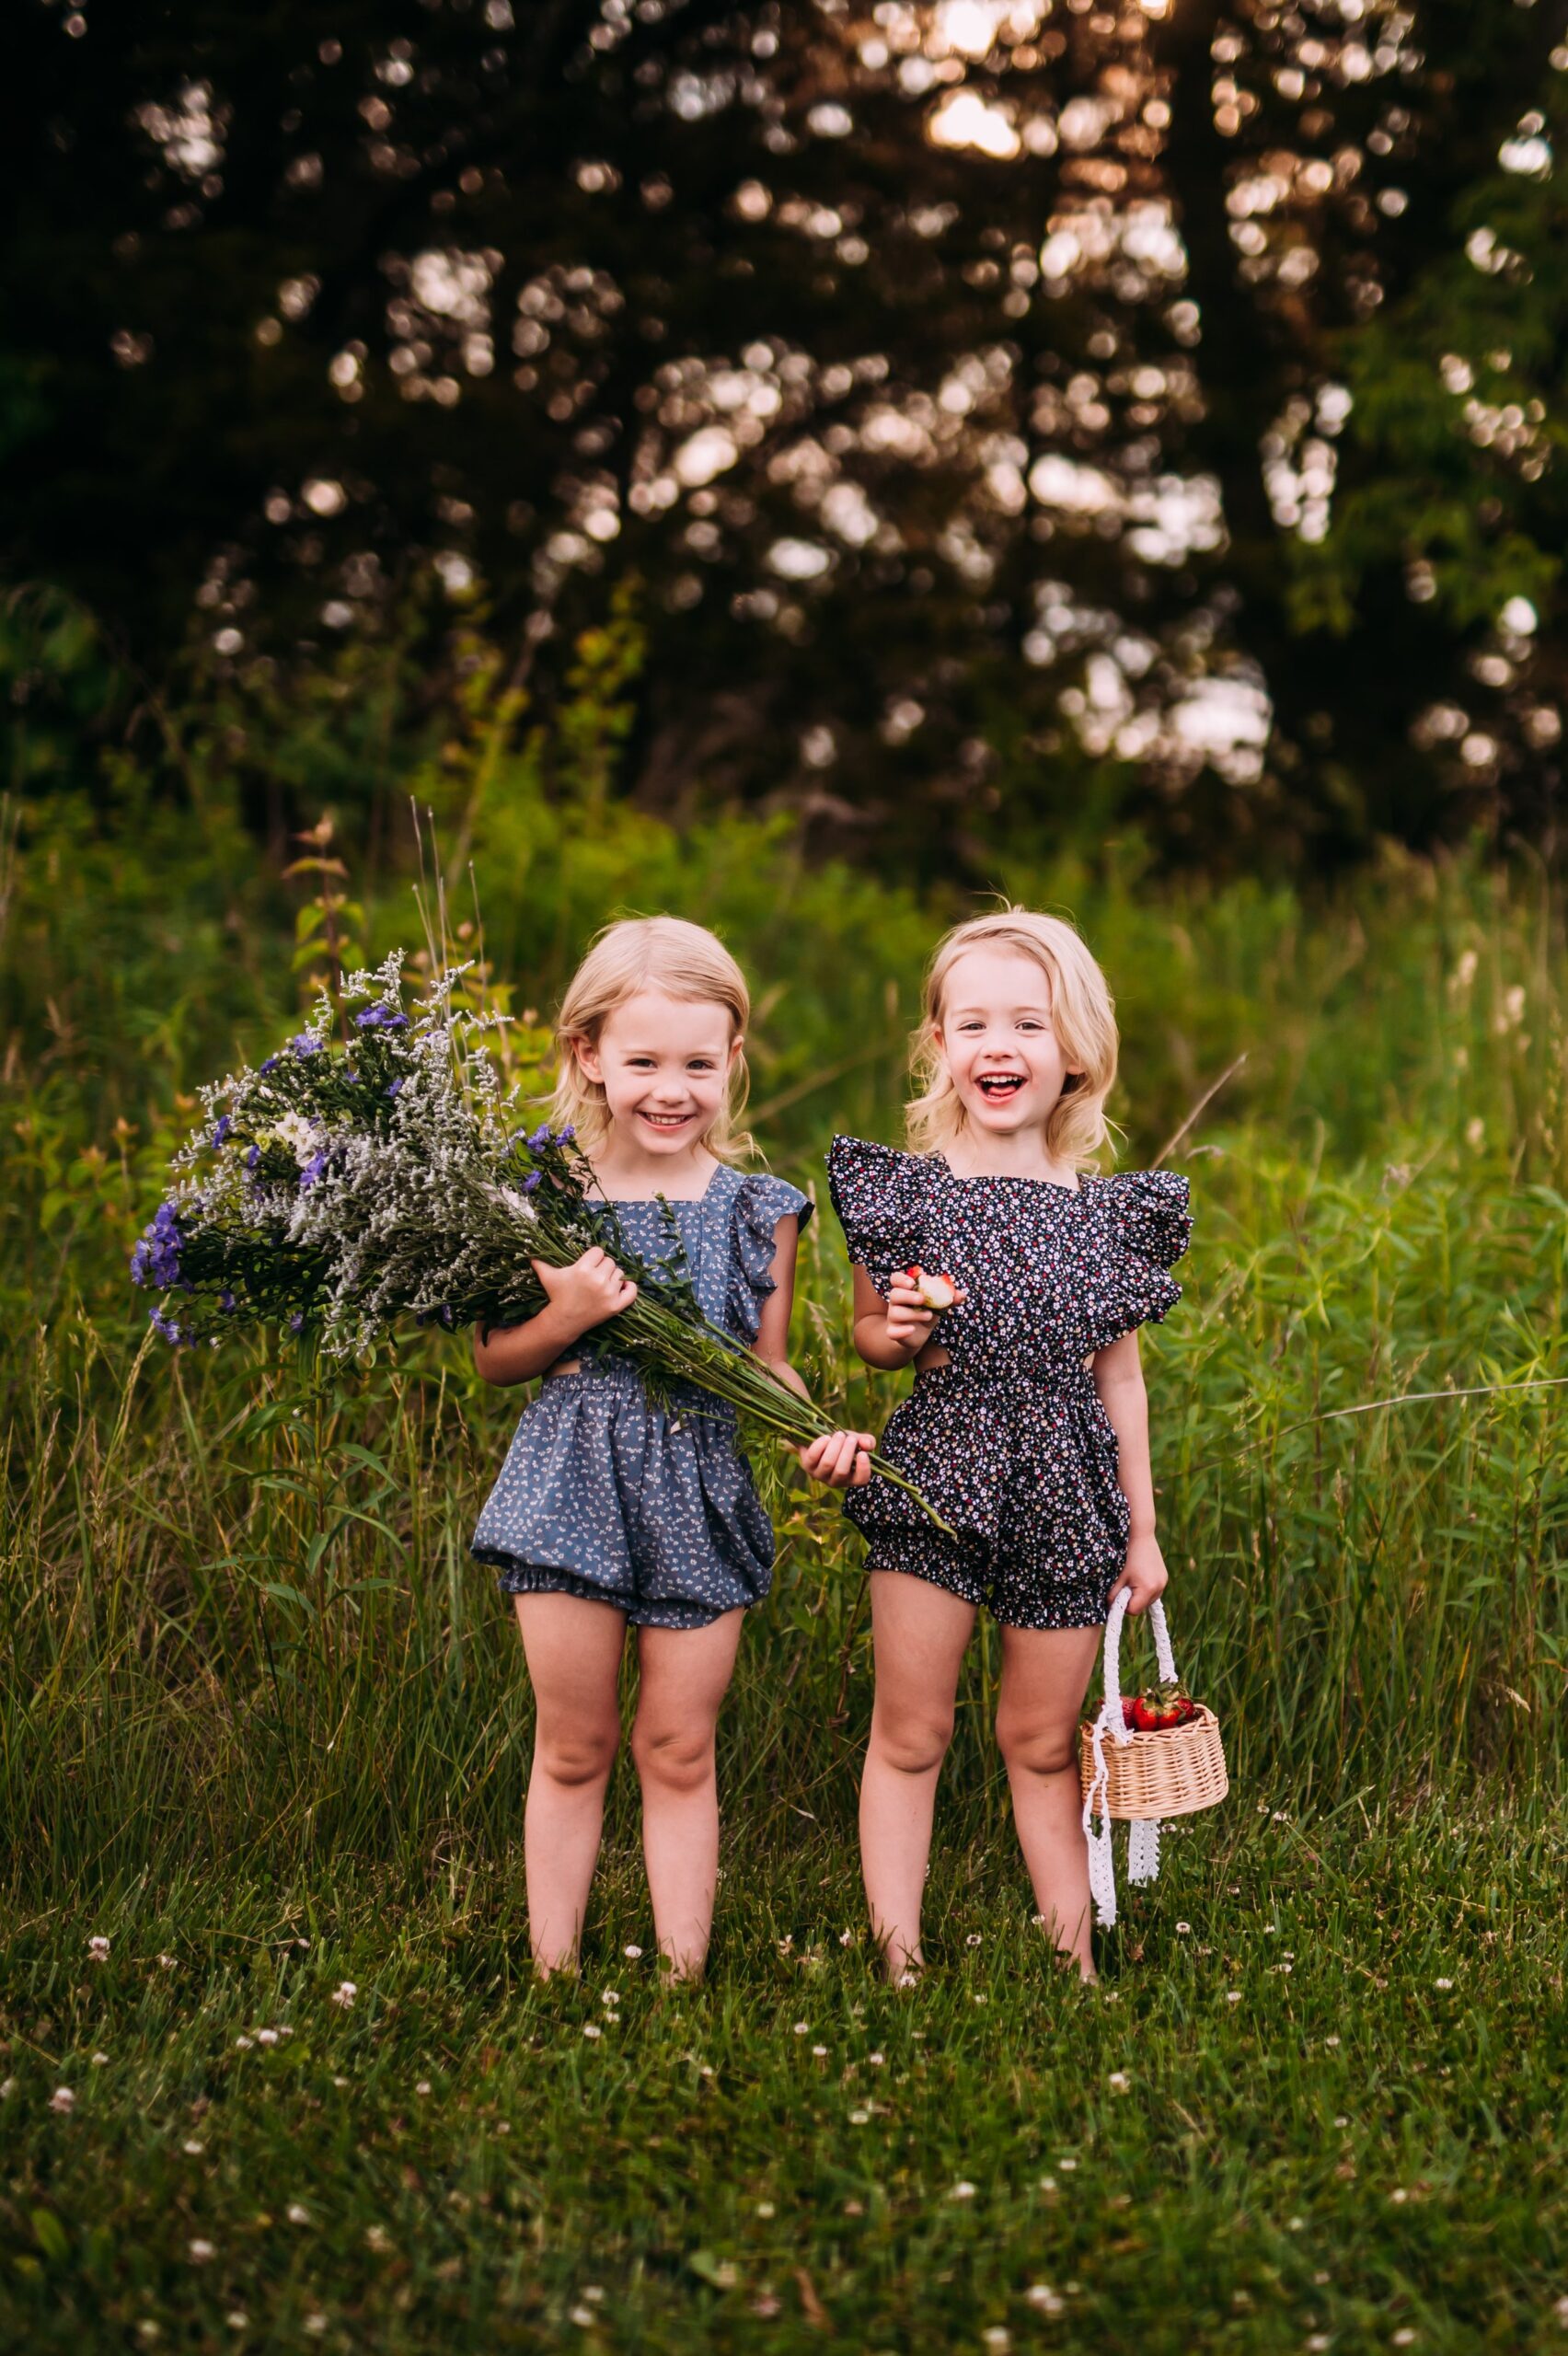 a fun outdoor family photo session at sunset with a picnic theme, twin girls, stylish hip colorful candid st louis photography